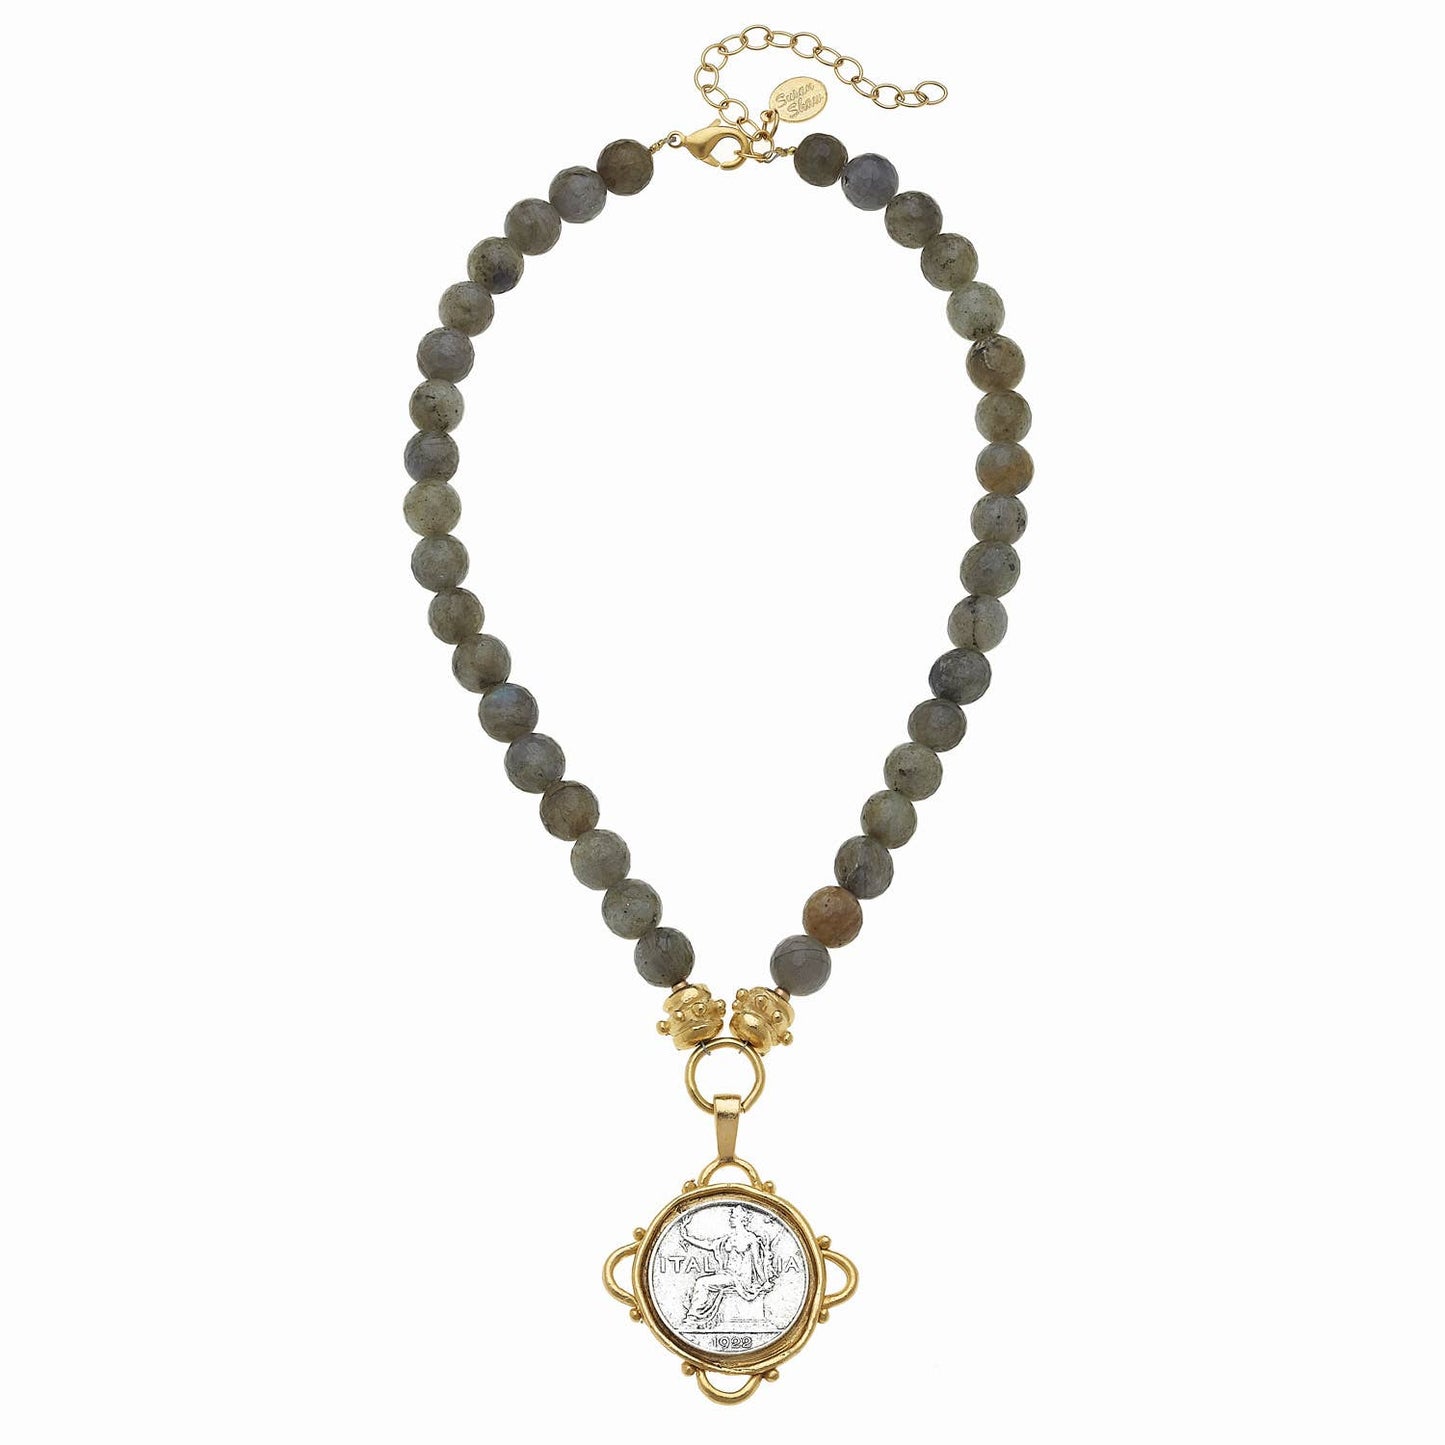 Handcast Gold and Silver Italian Coin on Necklace